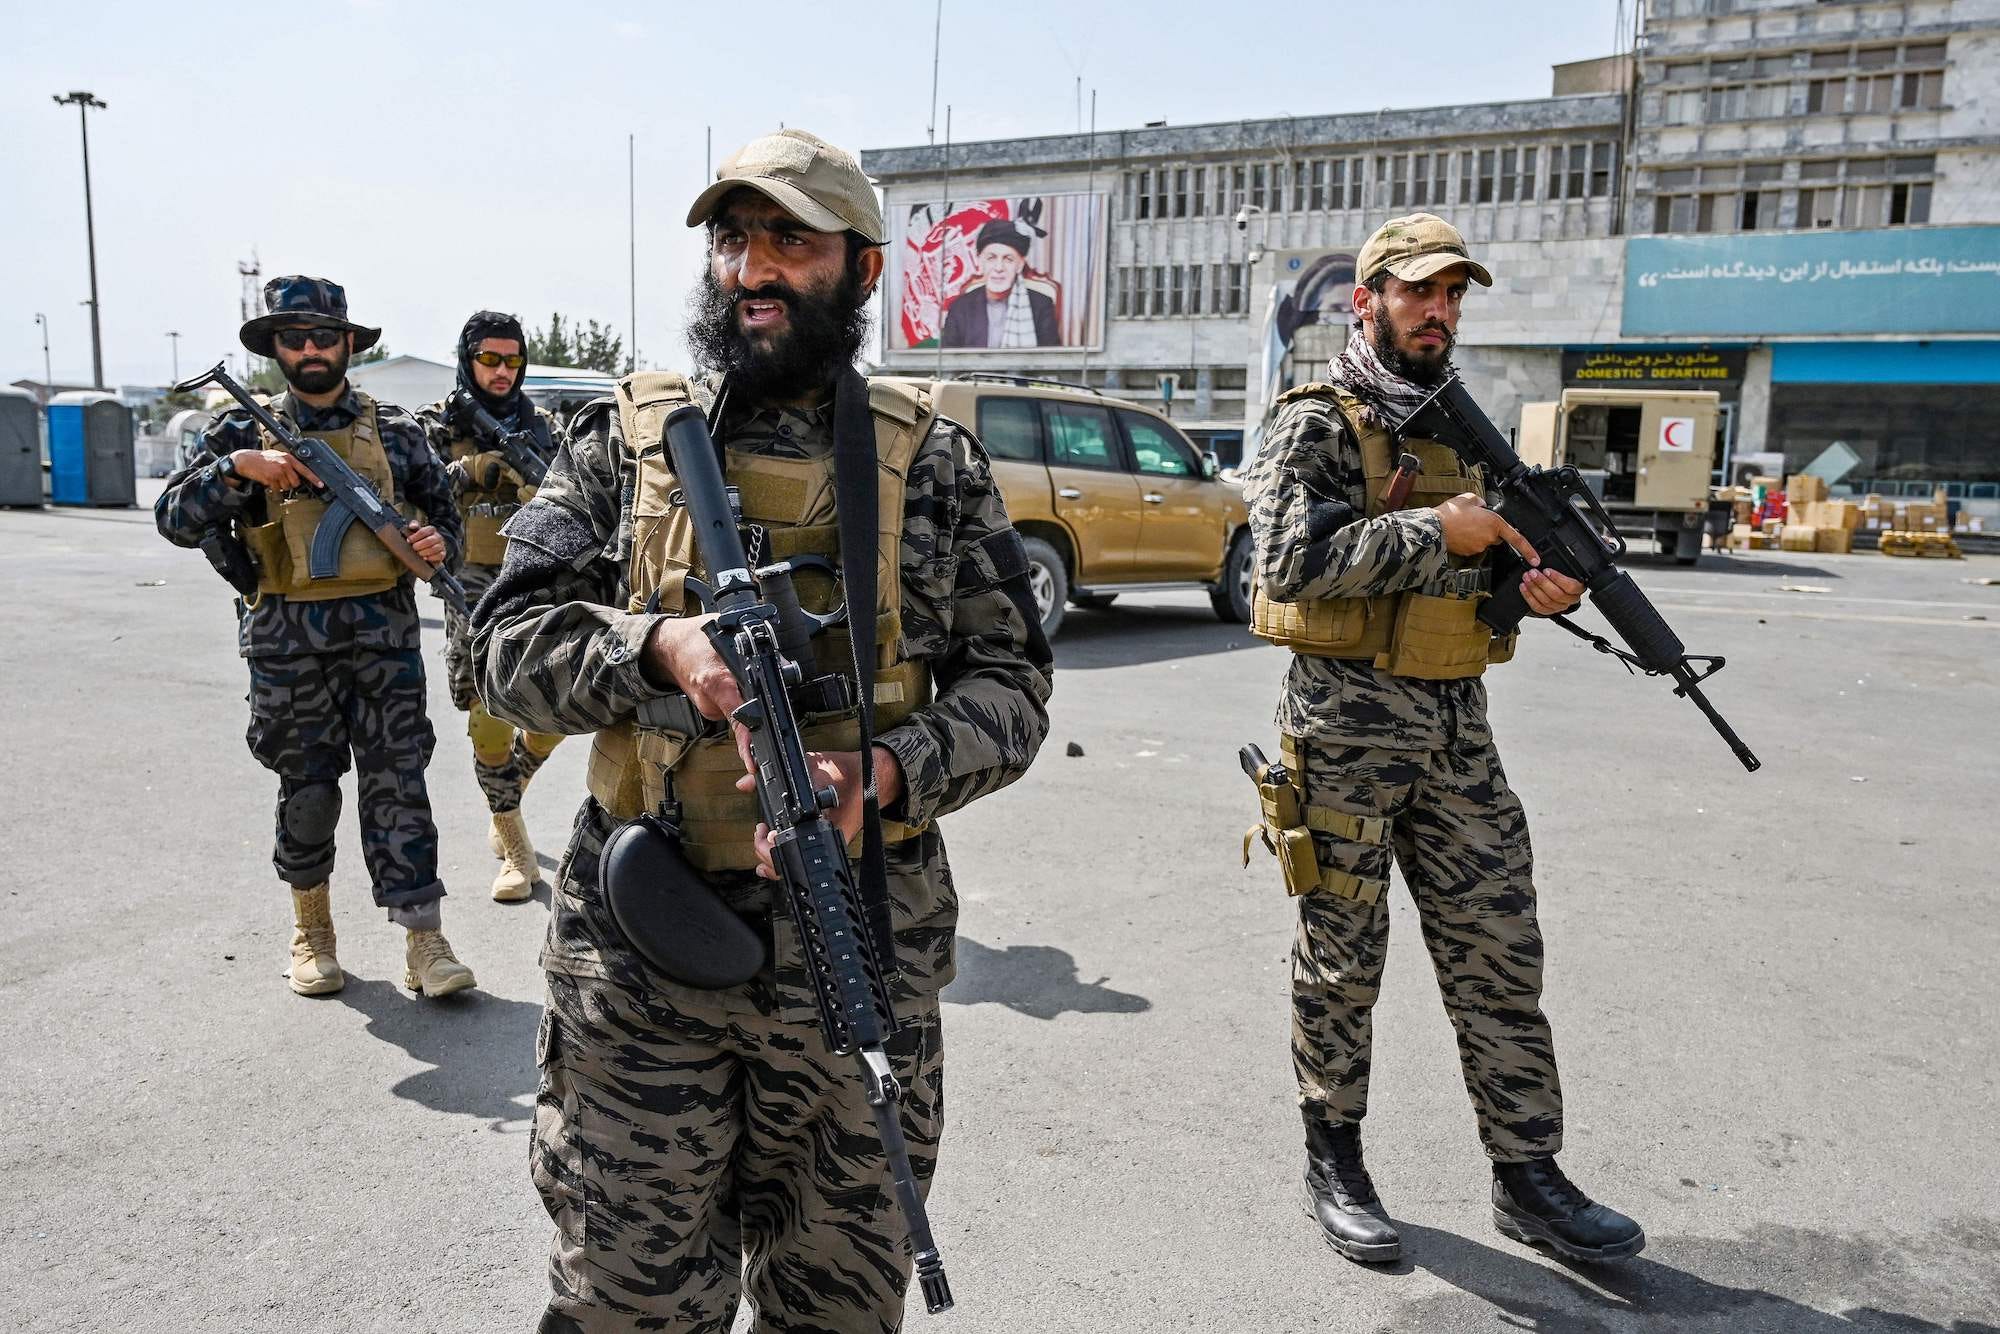 Taliban fighters with guns outside Kabul airport